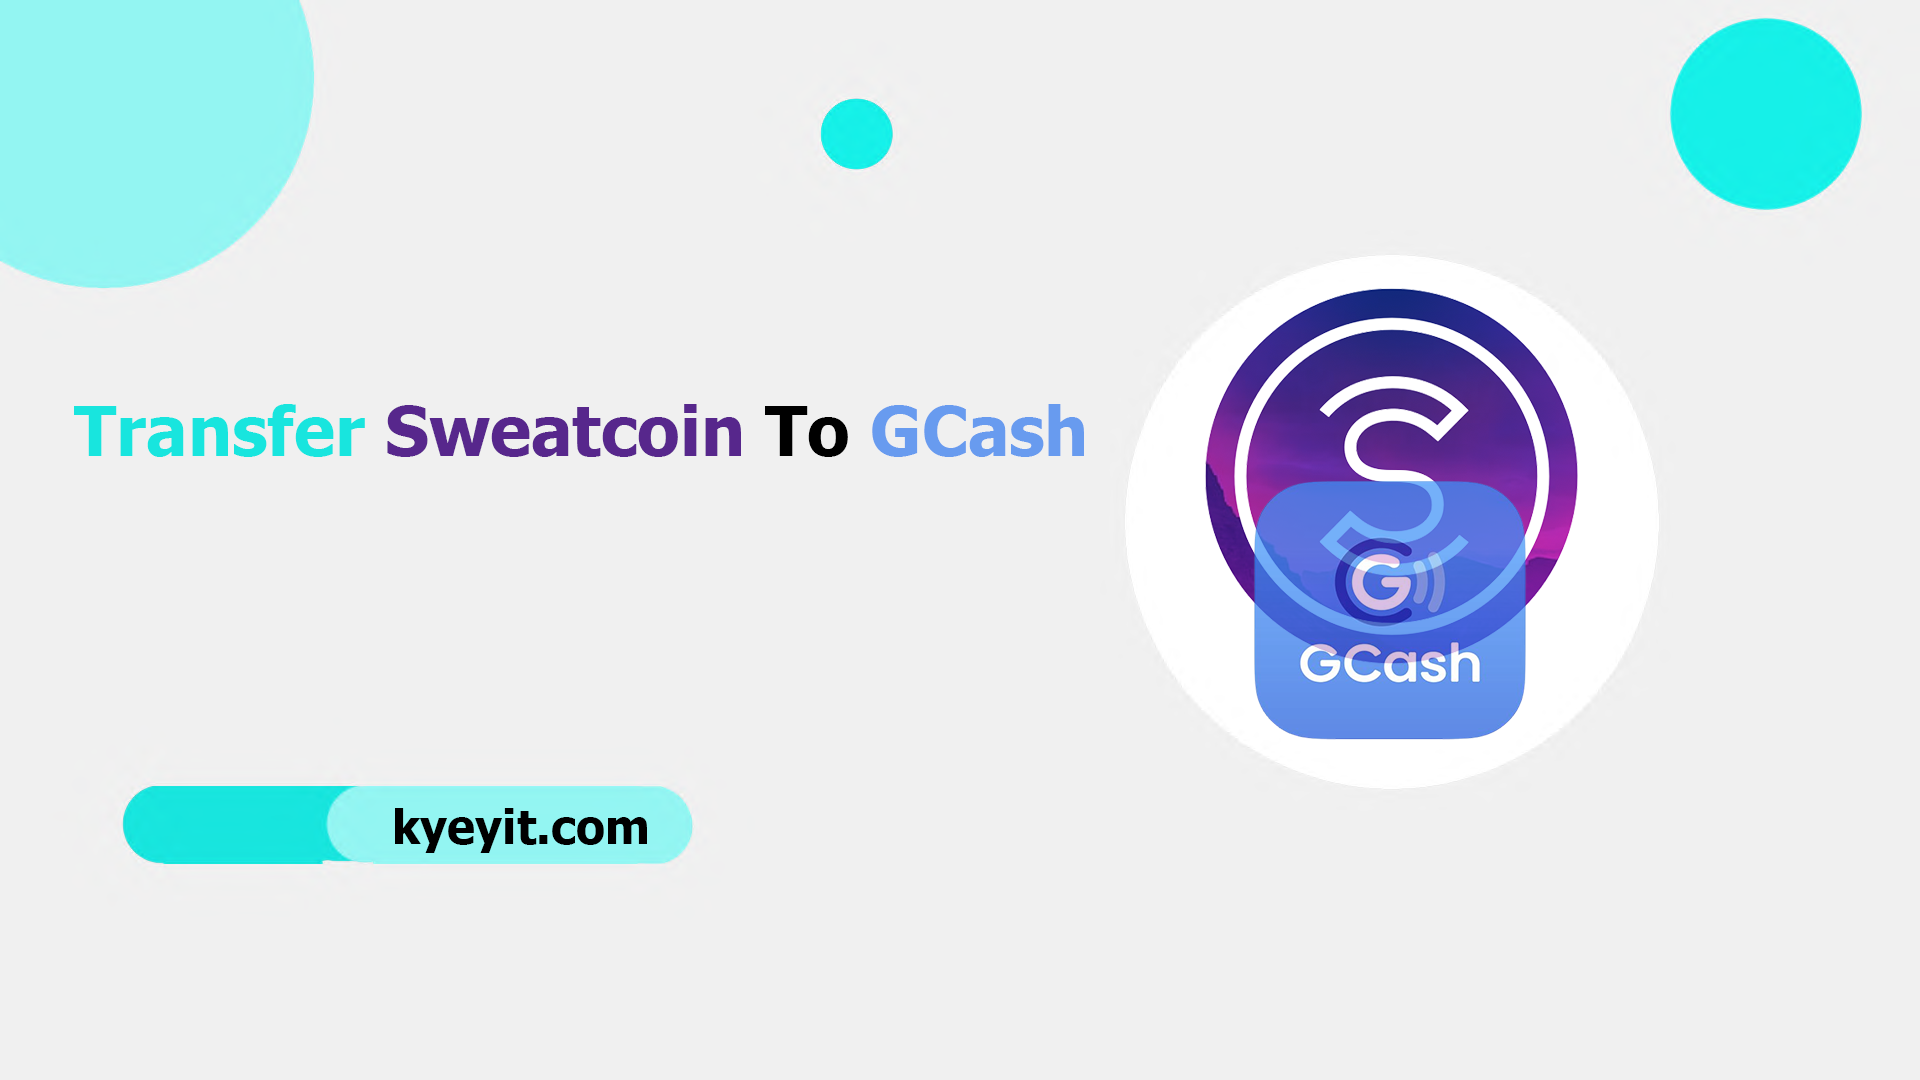 Transfer Sweatcoin To GCash In Minutes